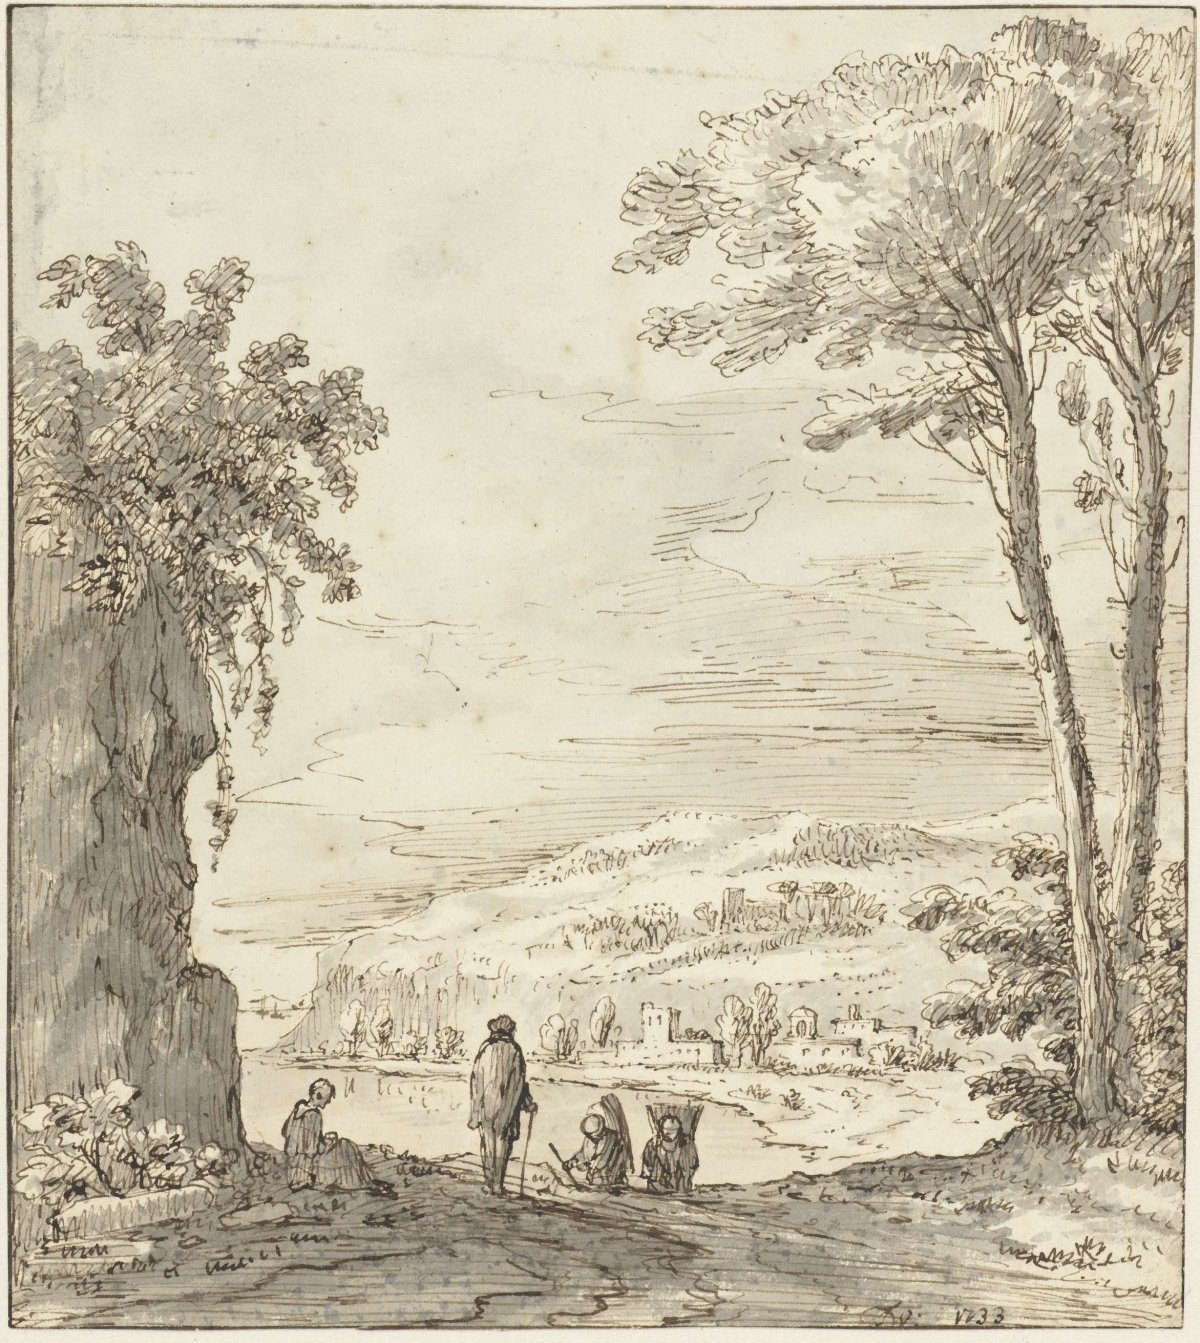 Italian river landscape with hikers by a rock, Theodoor Wilkens, 1733